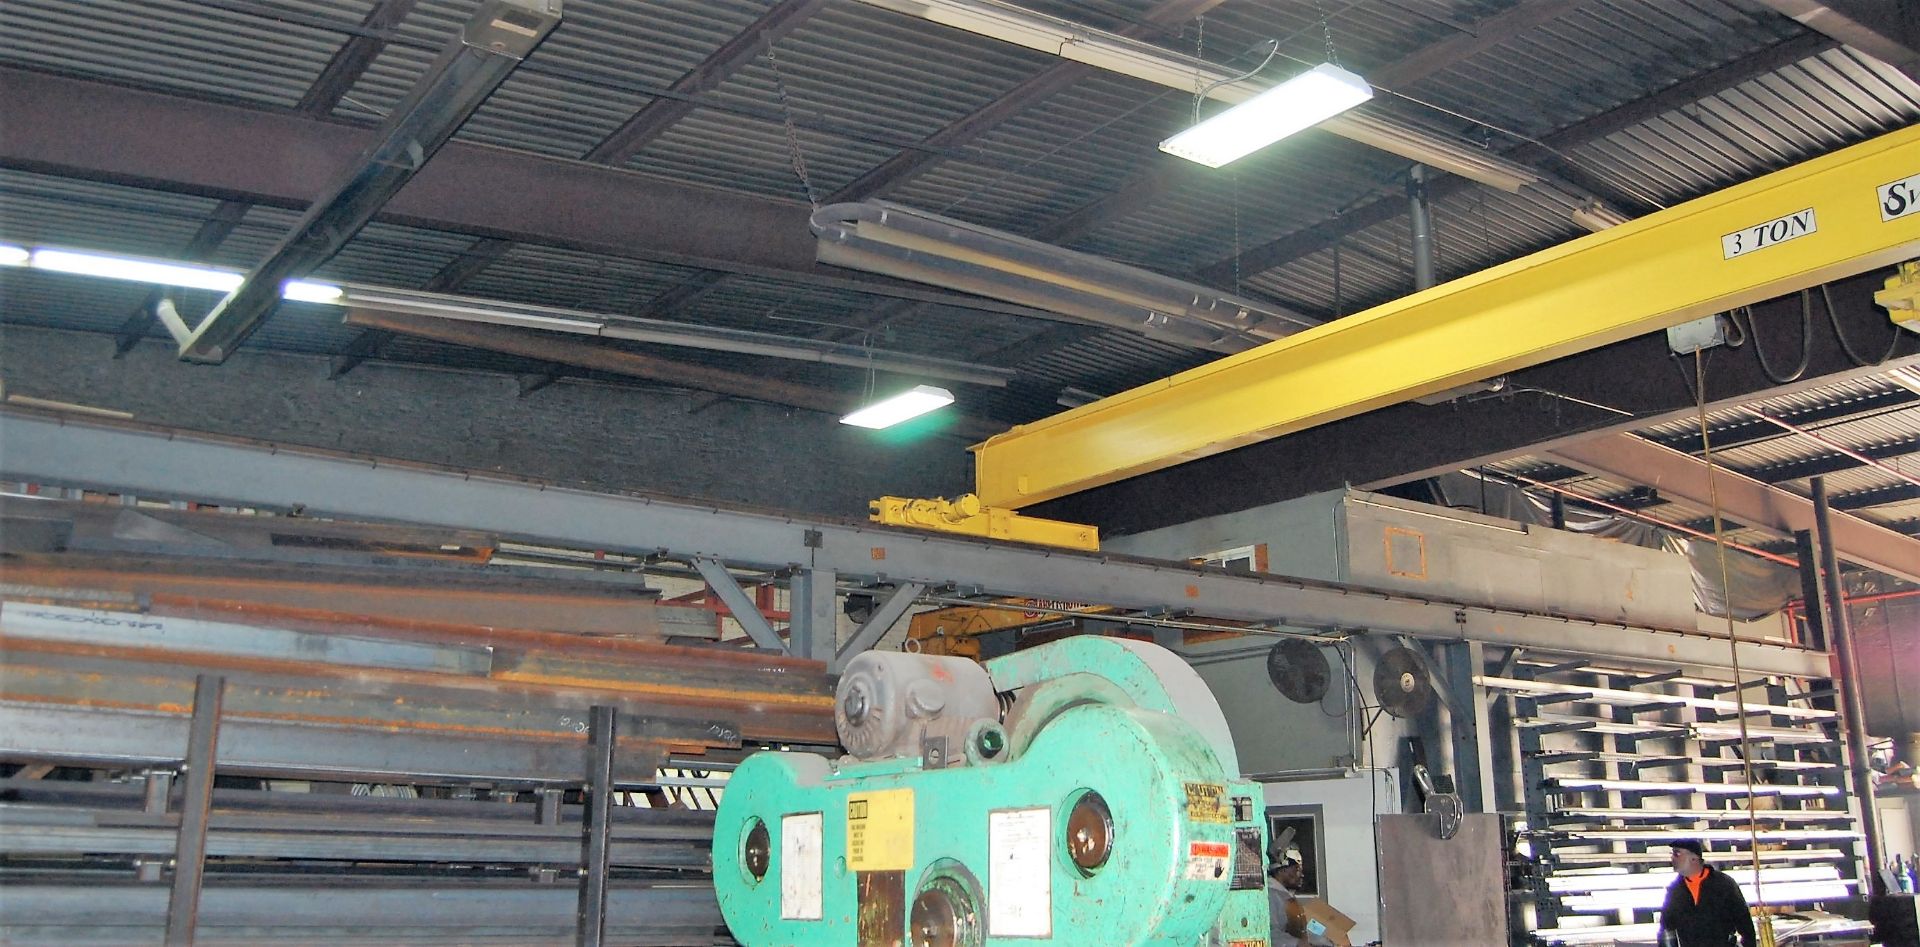 3 TON ACCO WRIGHT "SPEEDWAY" OVERHEAD BRIDGE CRANE, TOP RUNNING, SINGLE GIRDER, WITH APPROXIMATELY - Image 8 of 11